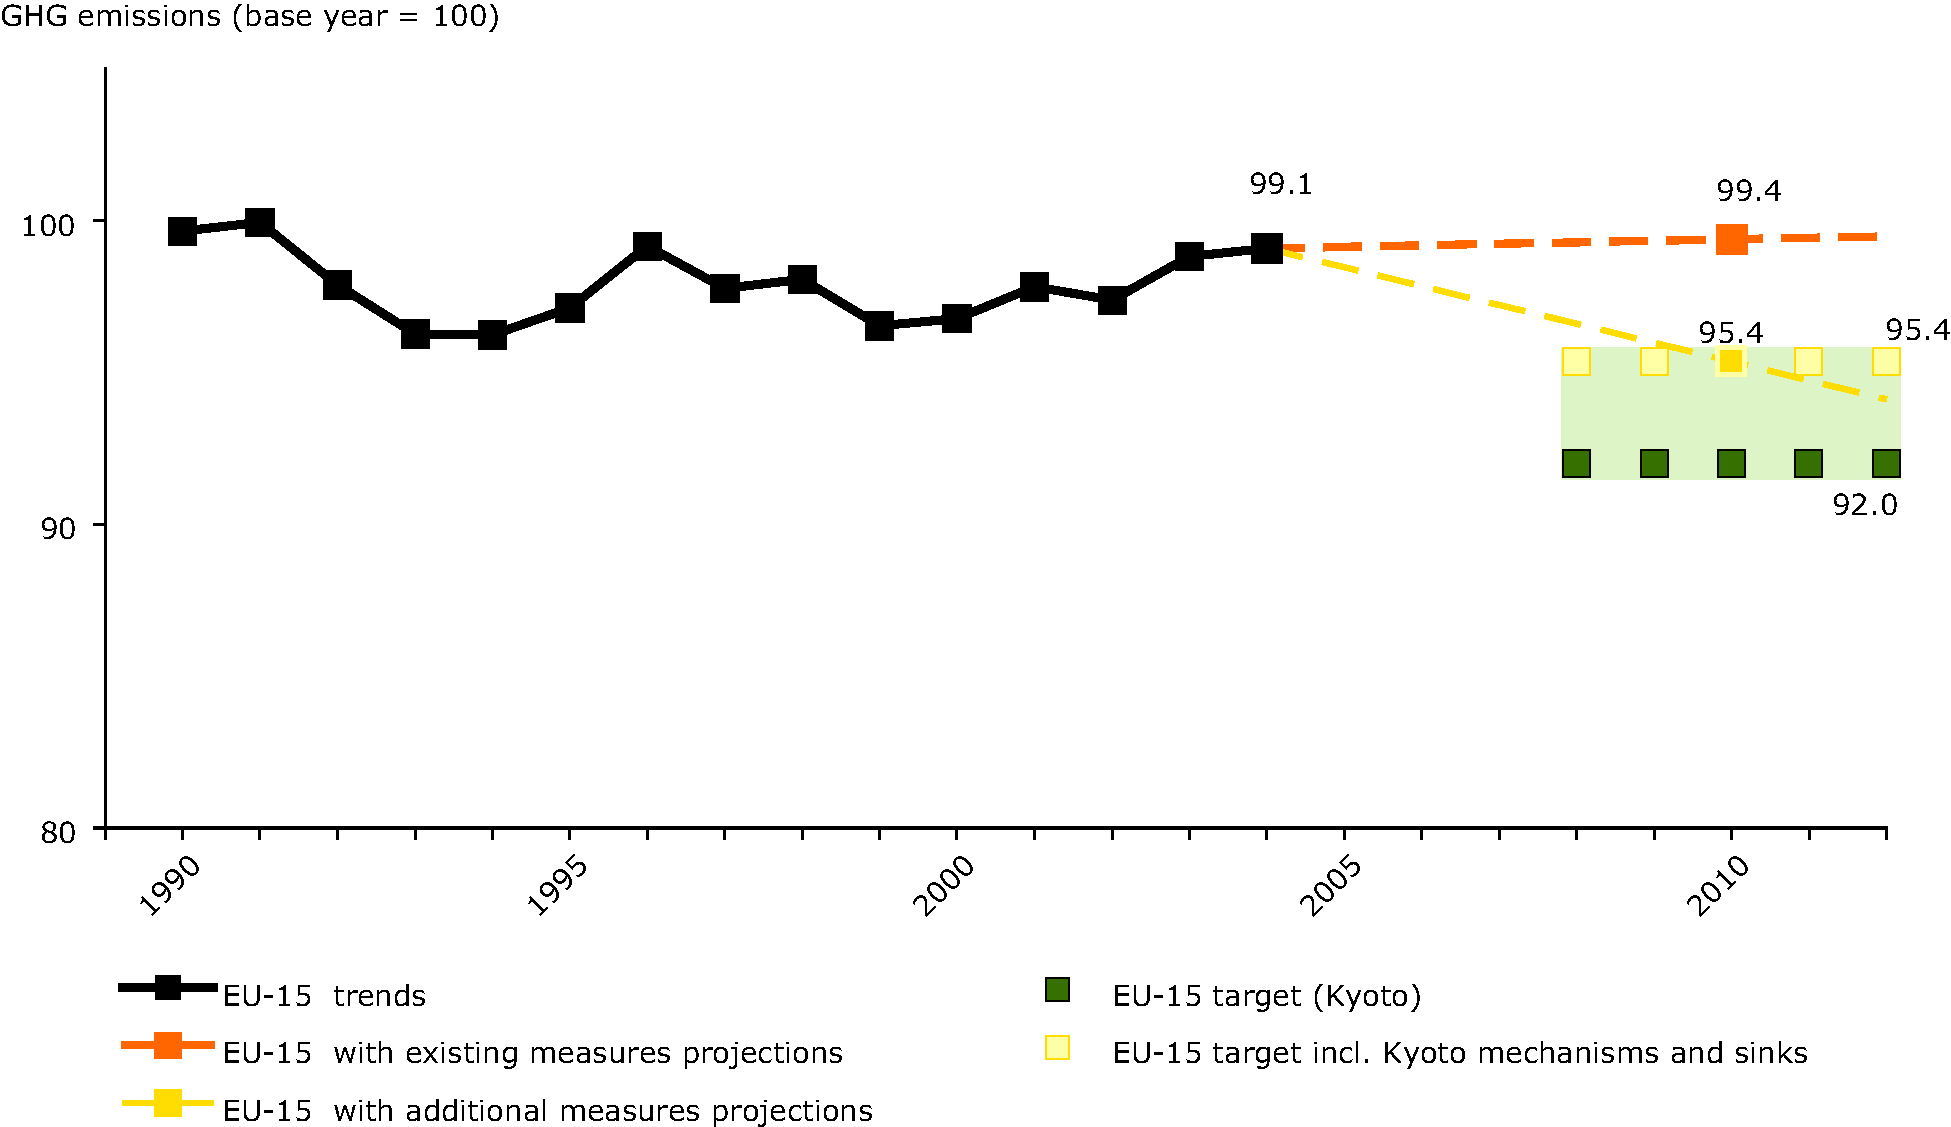 Actual and projected EU-15 greenhouse gas emissions compared with Kyoto target for 2008-12